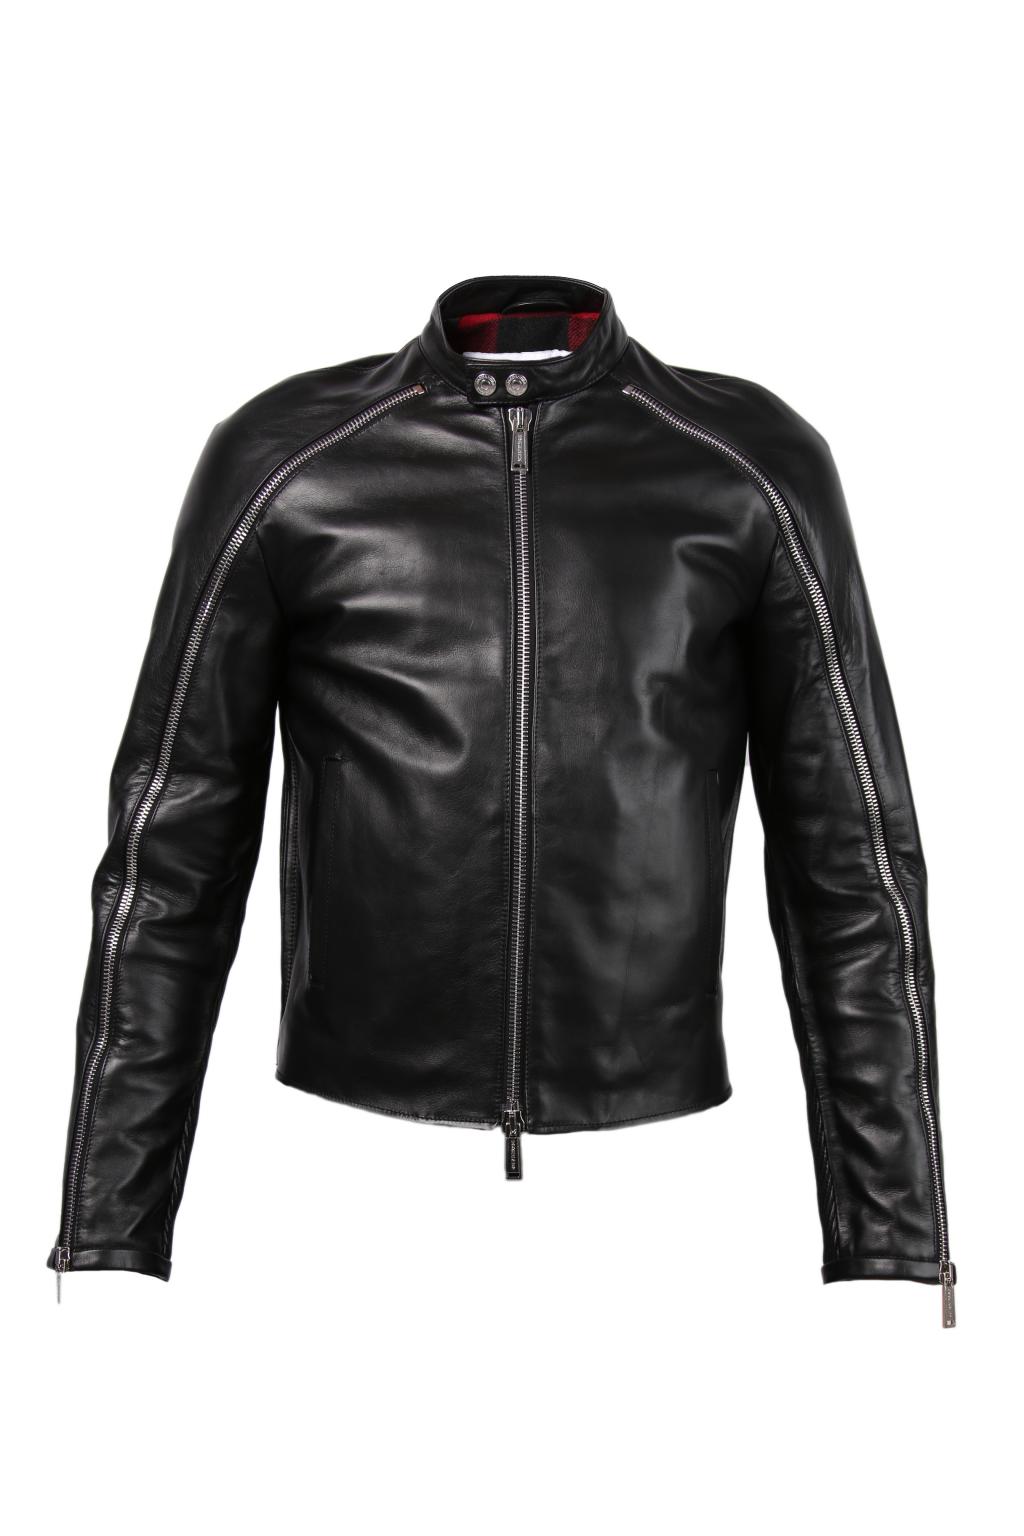 dsquared leather jacket sale